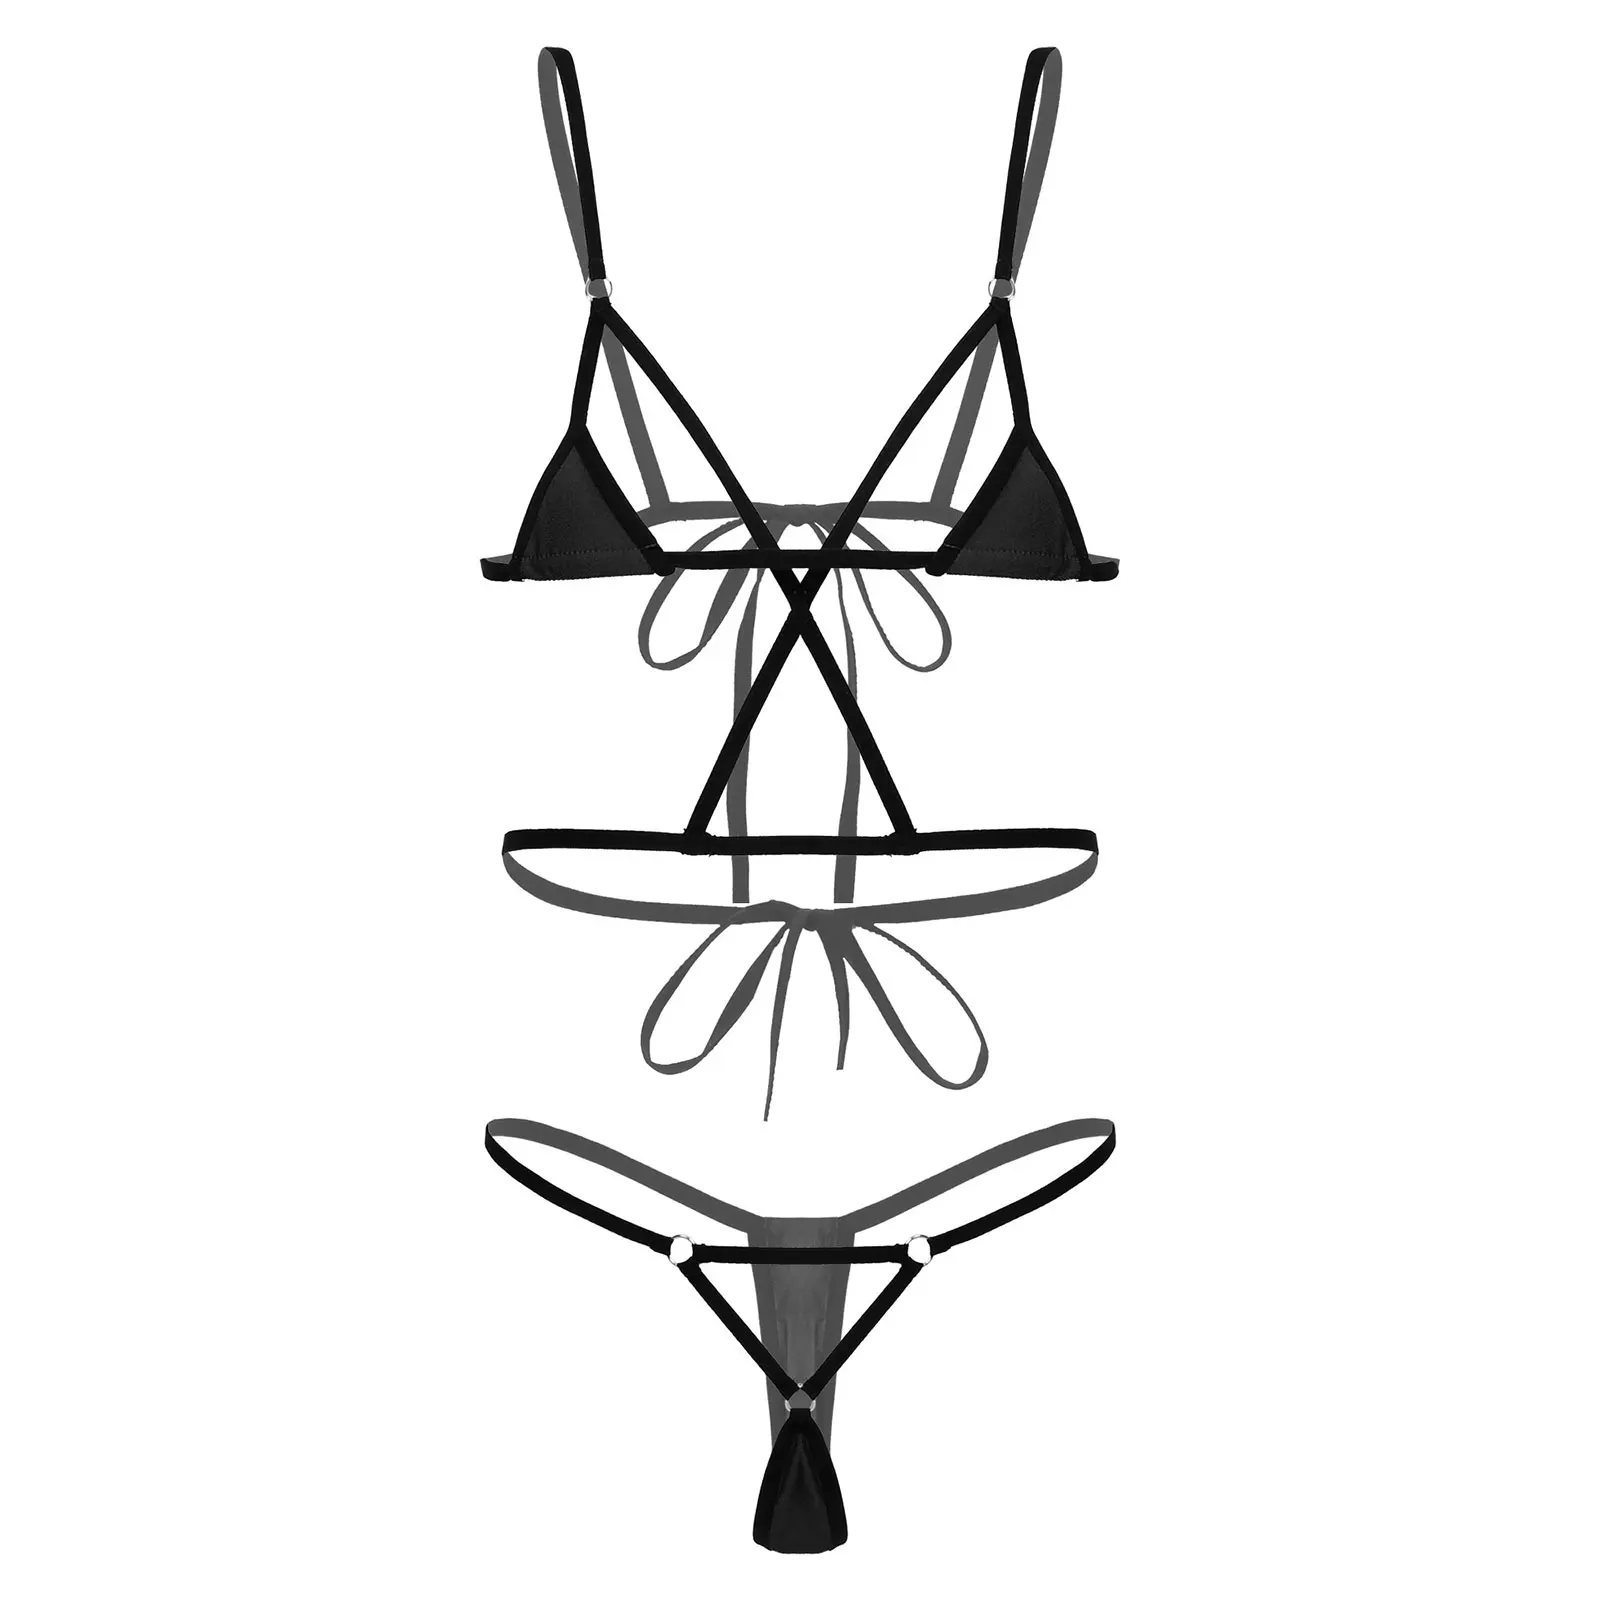 

Sexy Lingerie Erotic Swimwear Suit O-Ring Connected Bikini Swimsuit Womens Lingerie Set Adjustable Bra Tops with G-String Thongs